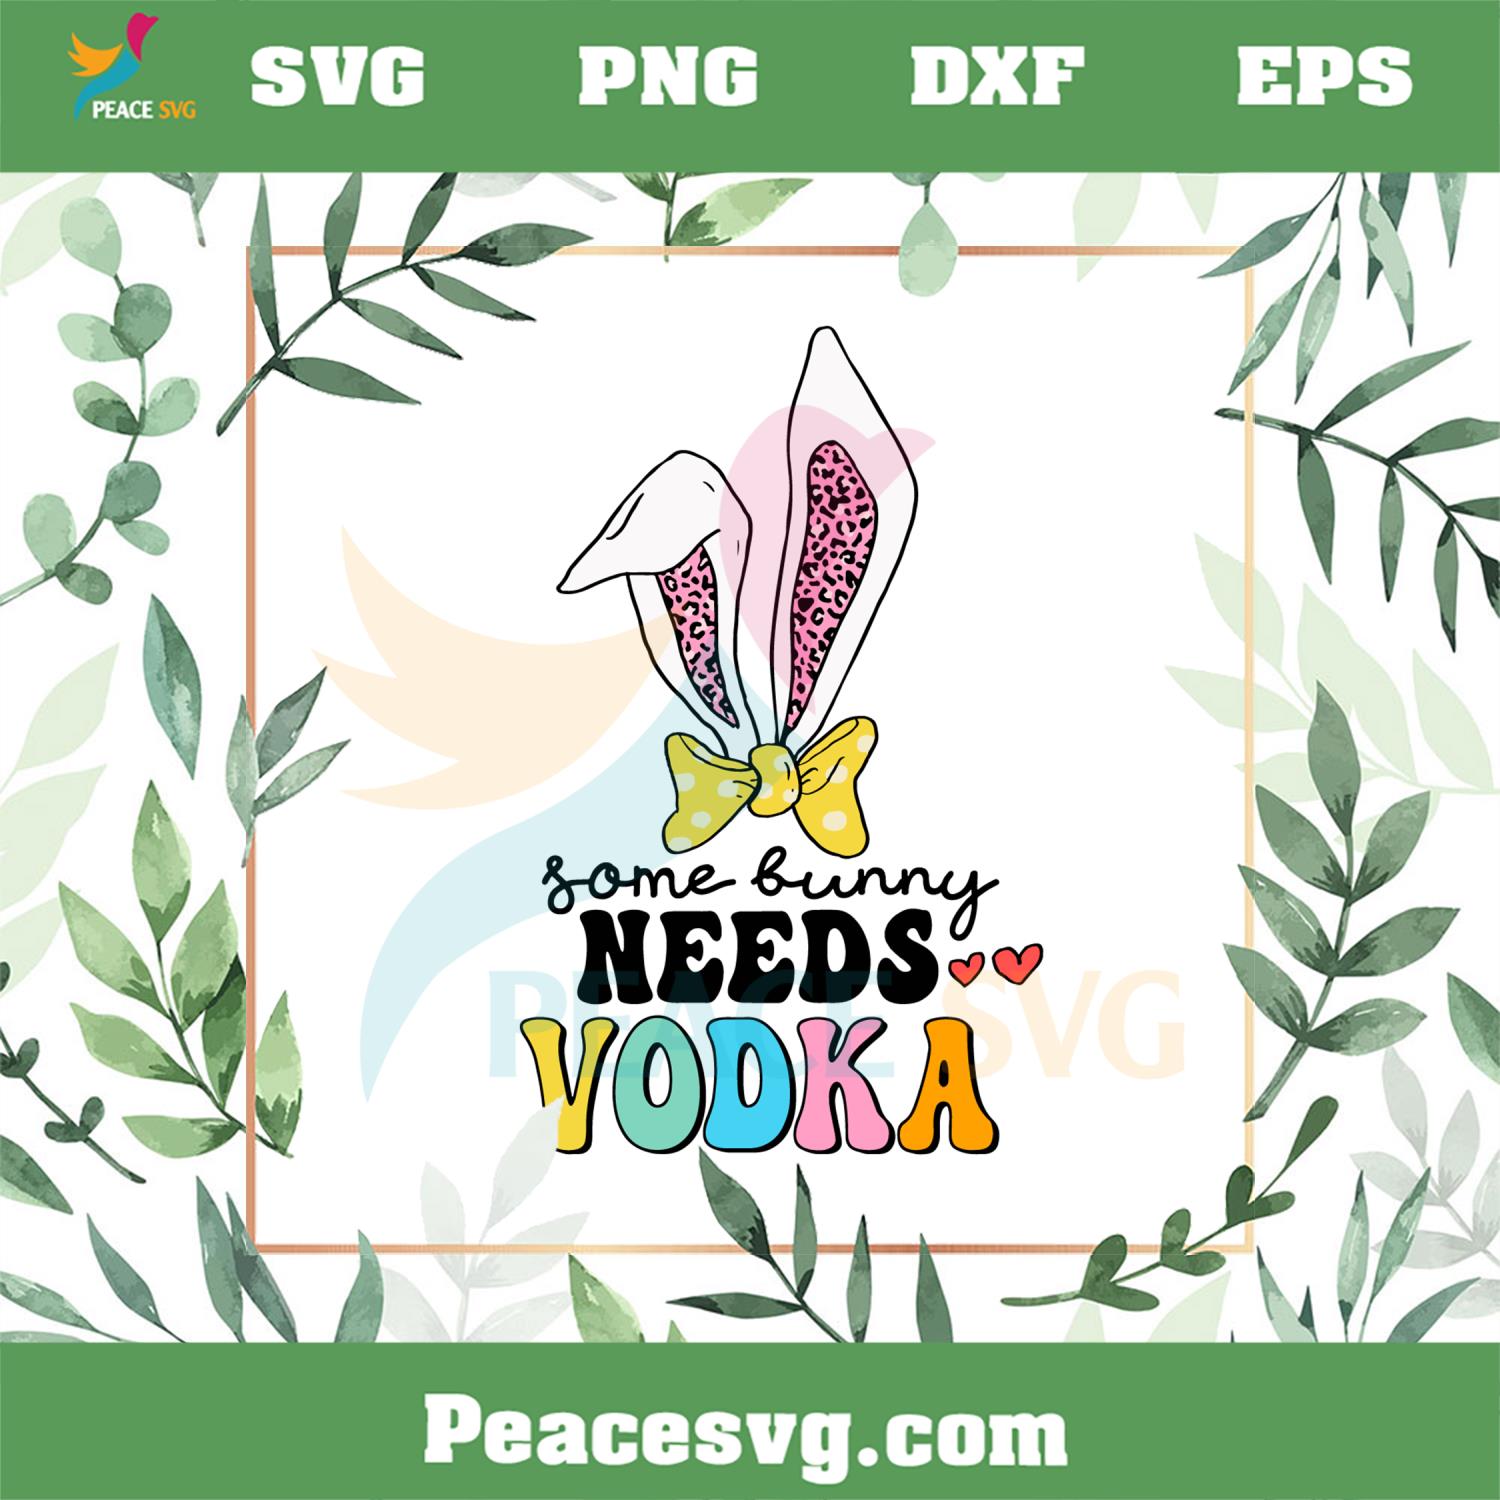 Some Bunny Needs Vodka Funny Easter Bunny SVG Cutting Files